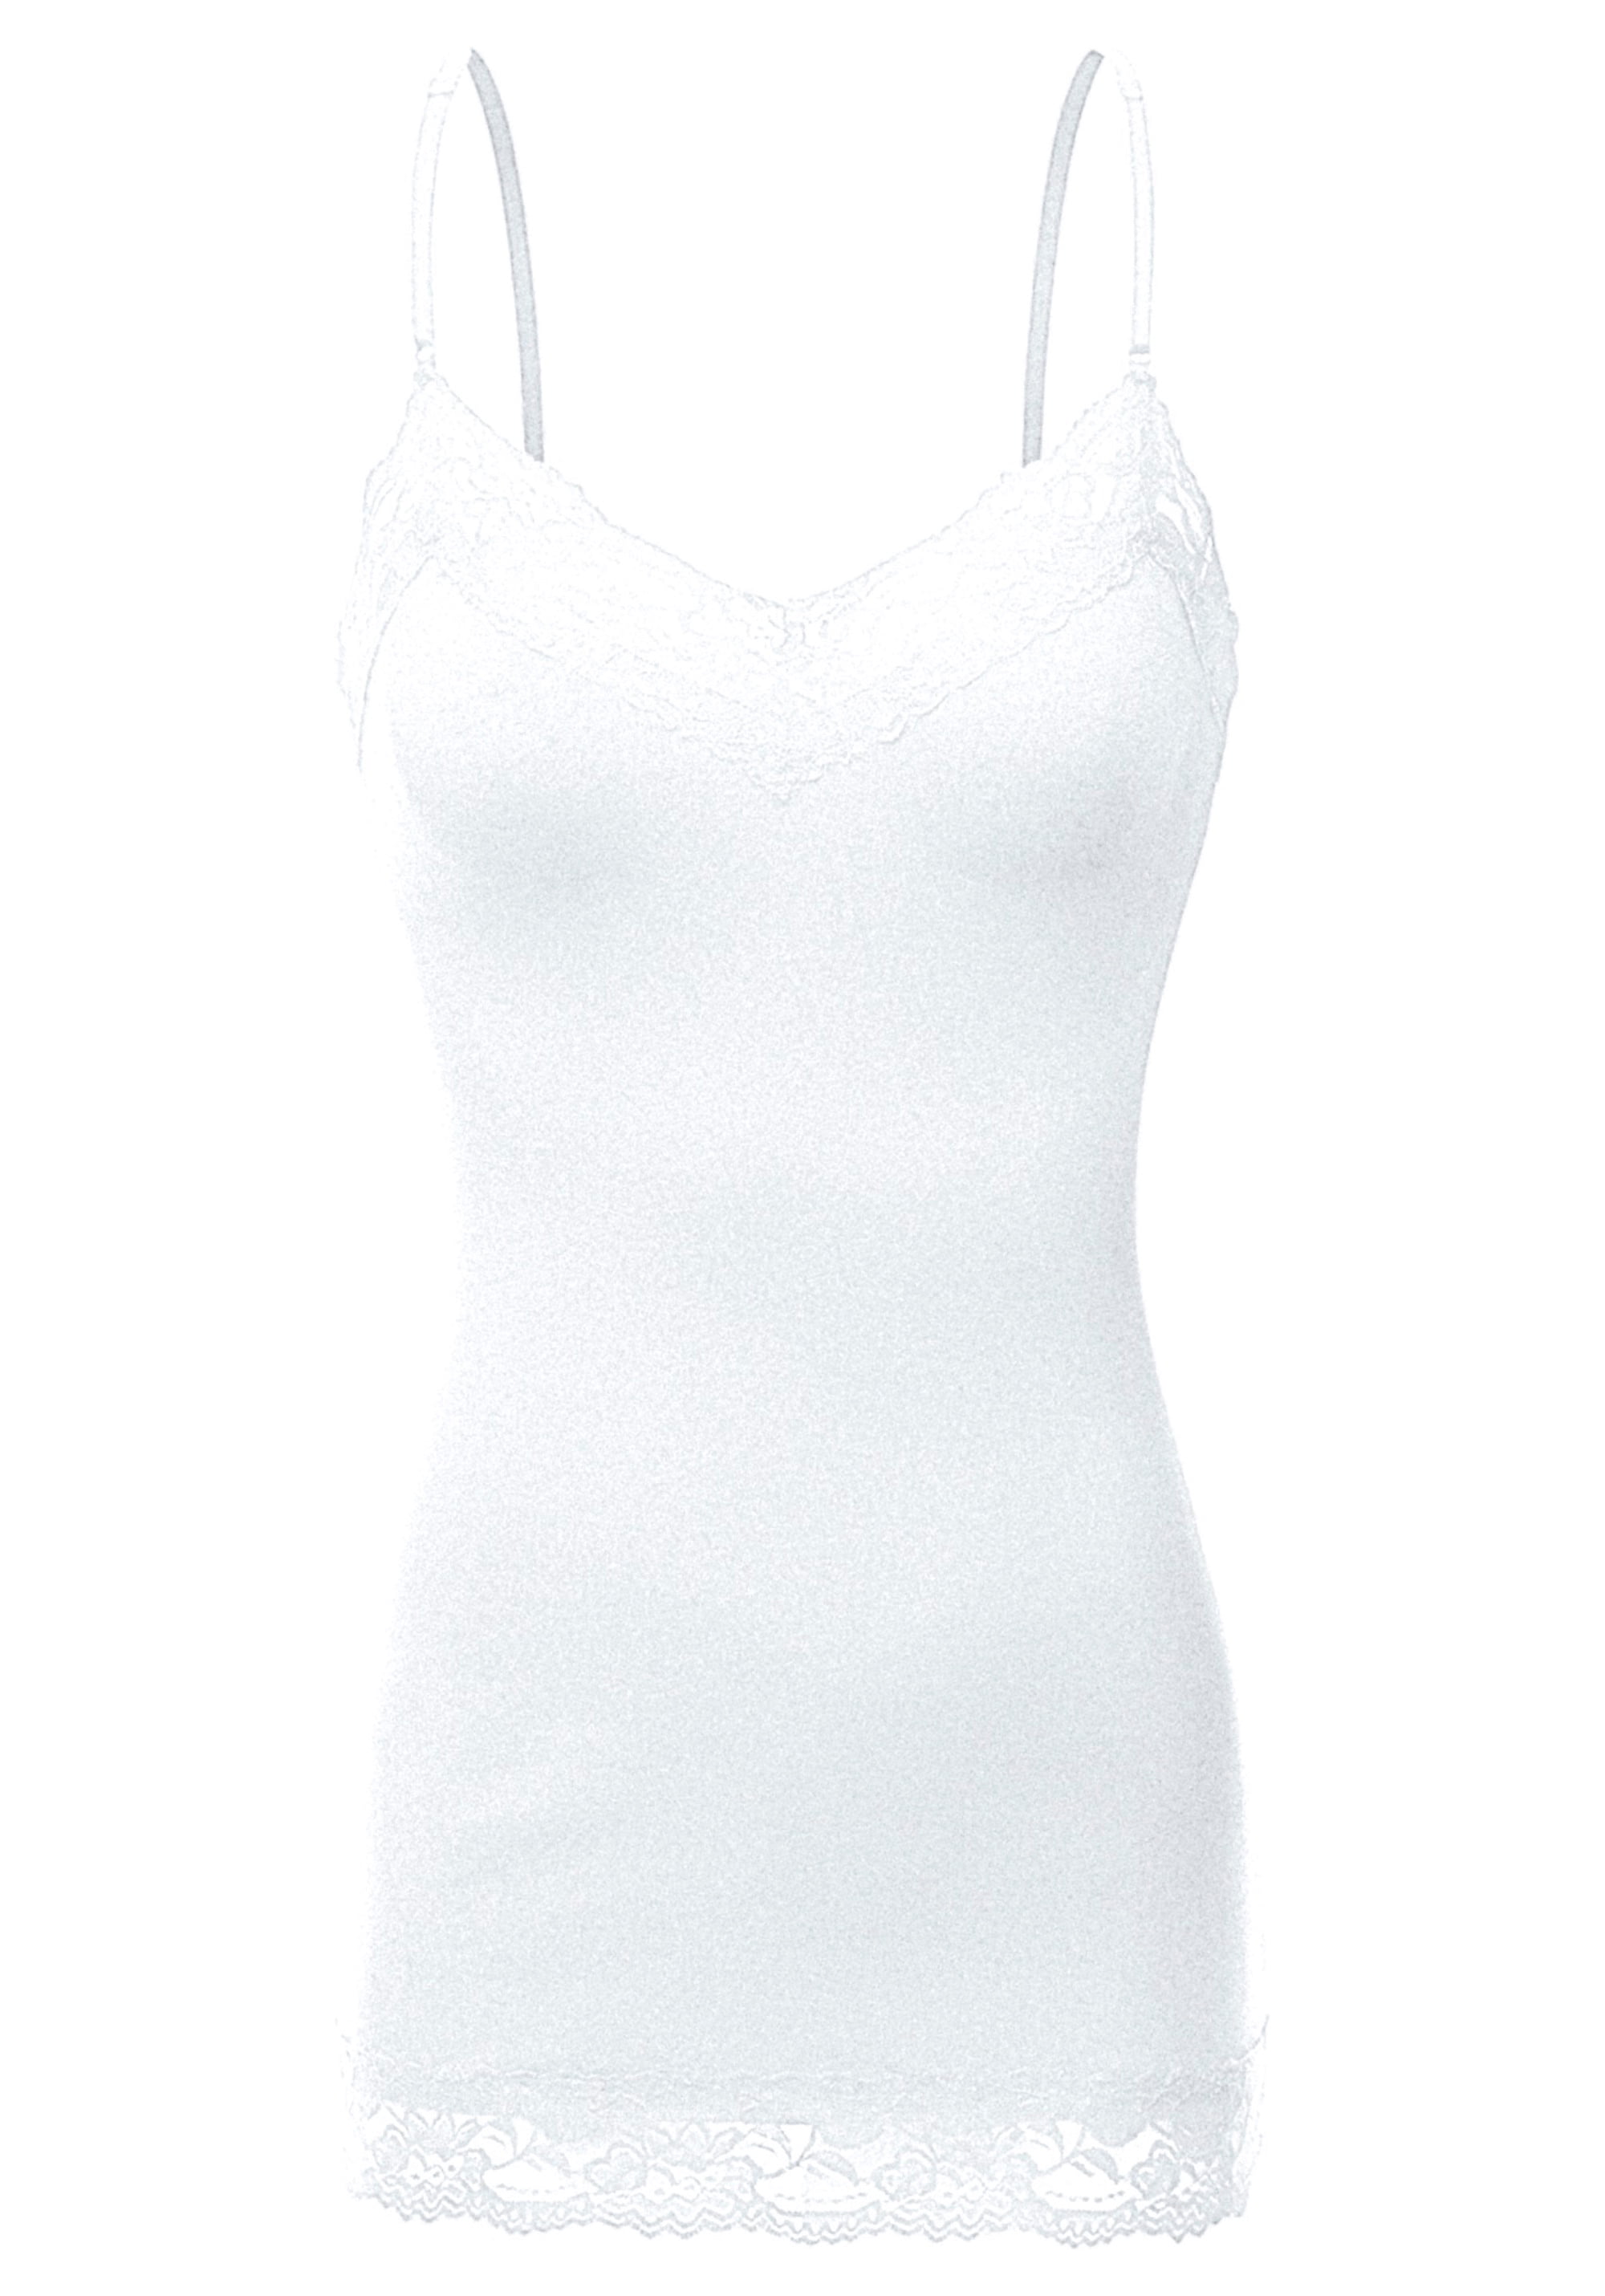 Womens Lace Trim V-Neck Camisole Loungewear Undershirt Tank Top Soft and Comfy ClothingAve Value-Pack Available